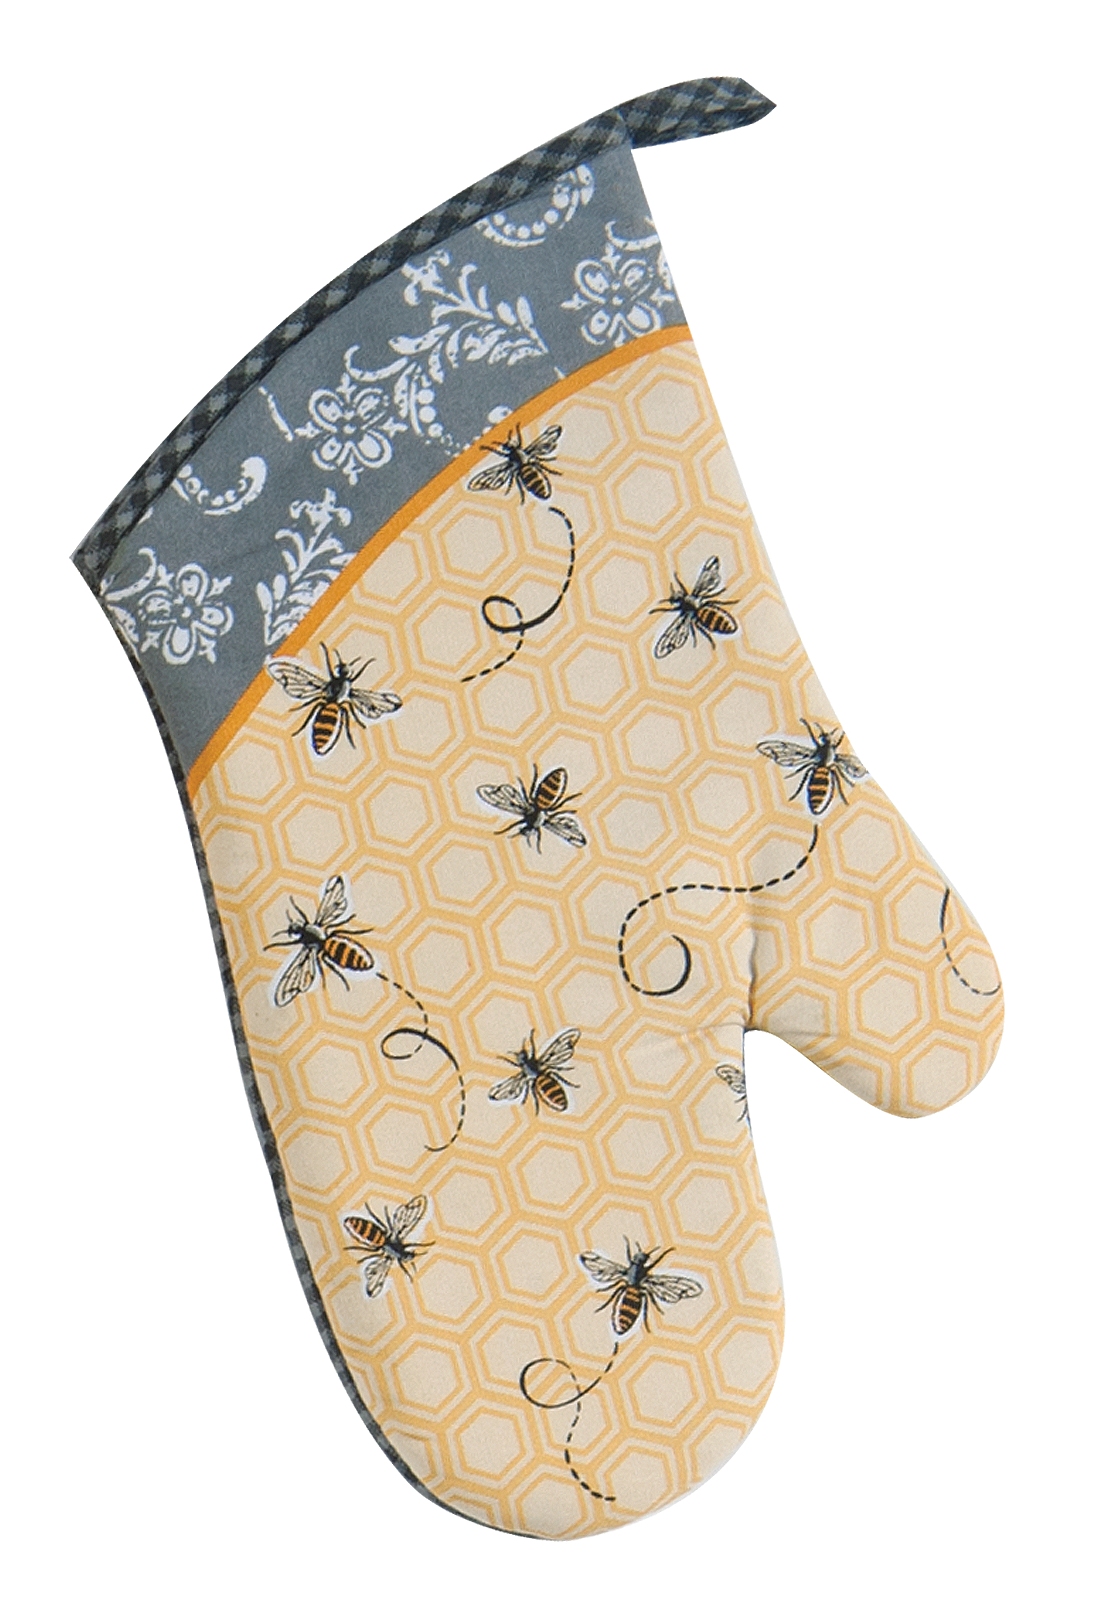 Kay Dee Bumble Bee Yellow and Black Cotton Kitchen Oven Mitt 13 Inches